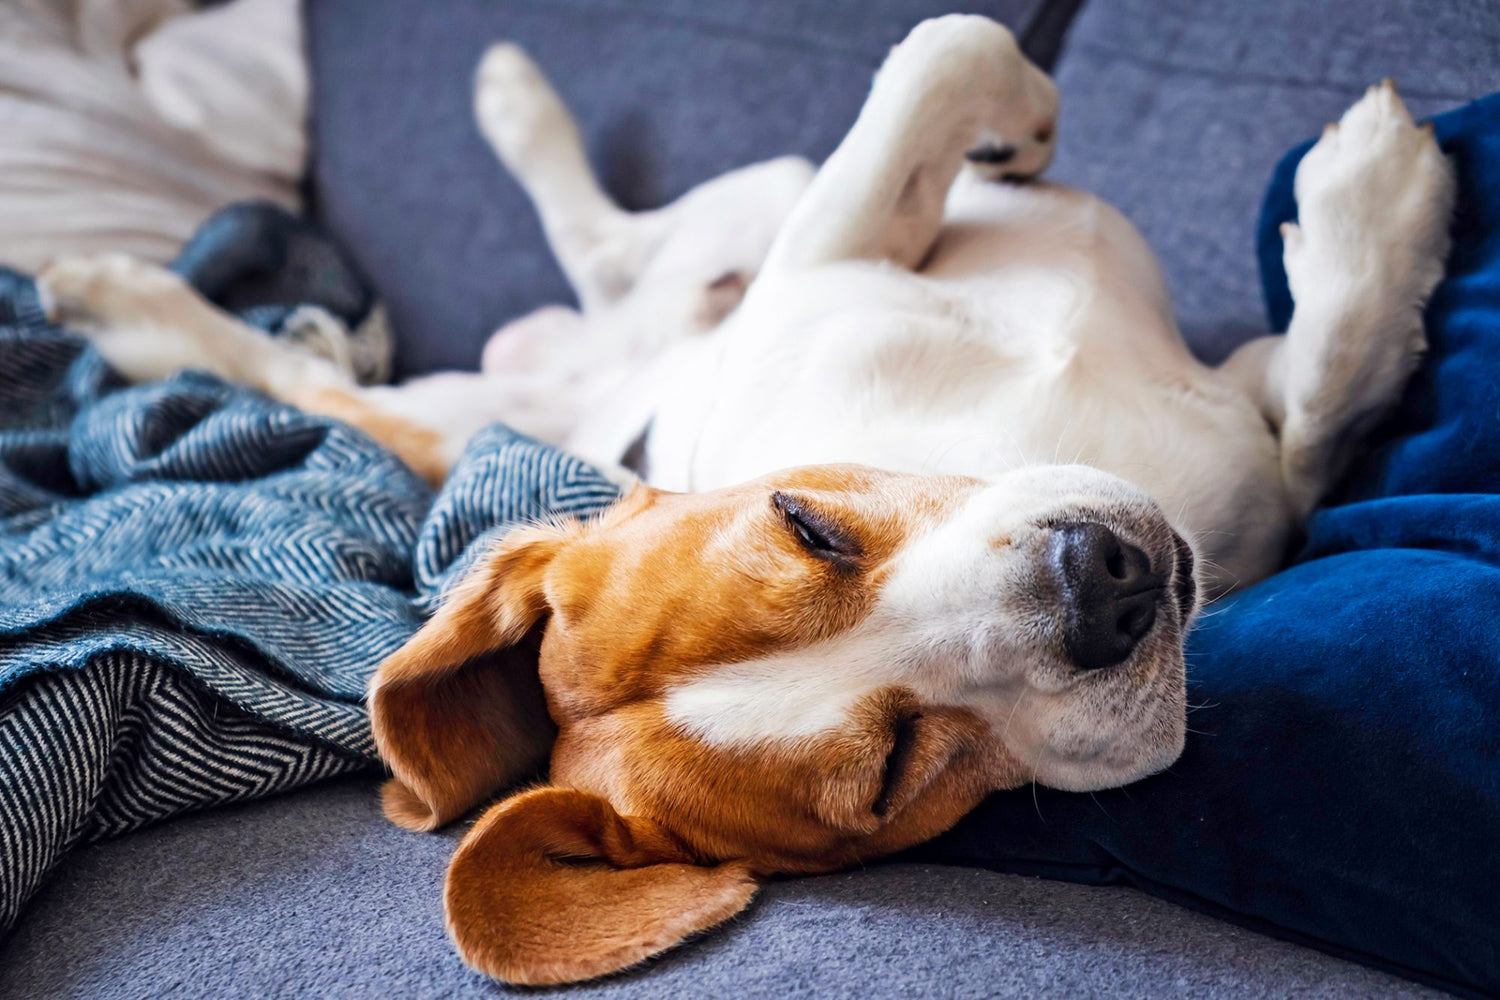 7 common dog sleeping positions and their meaning